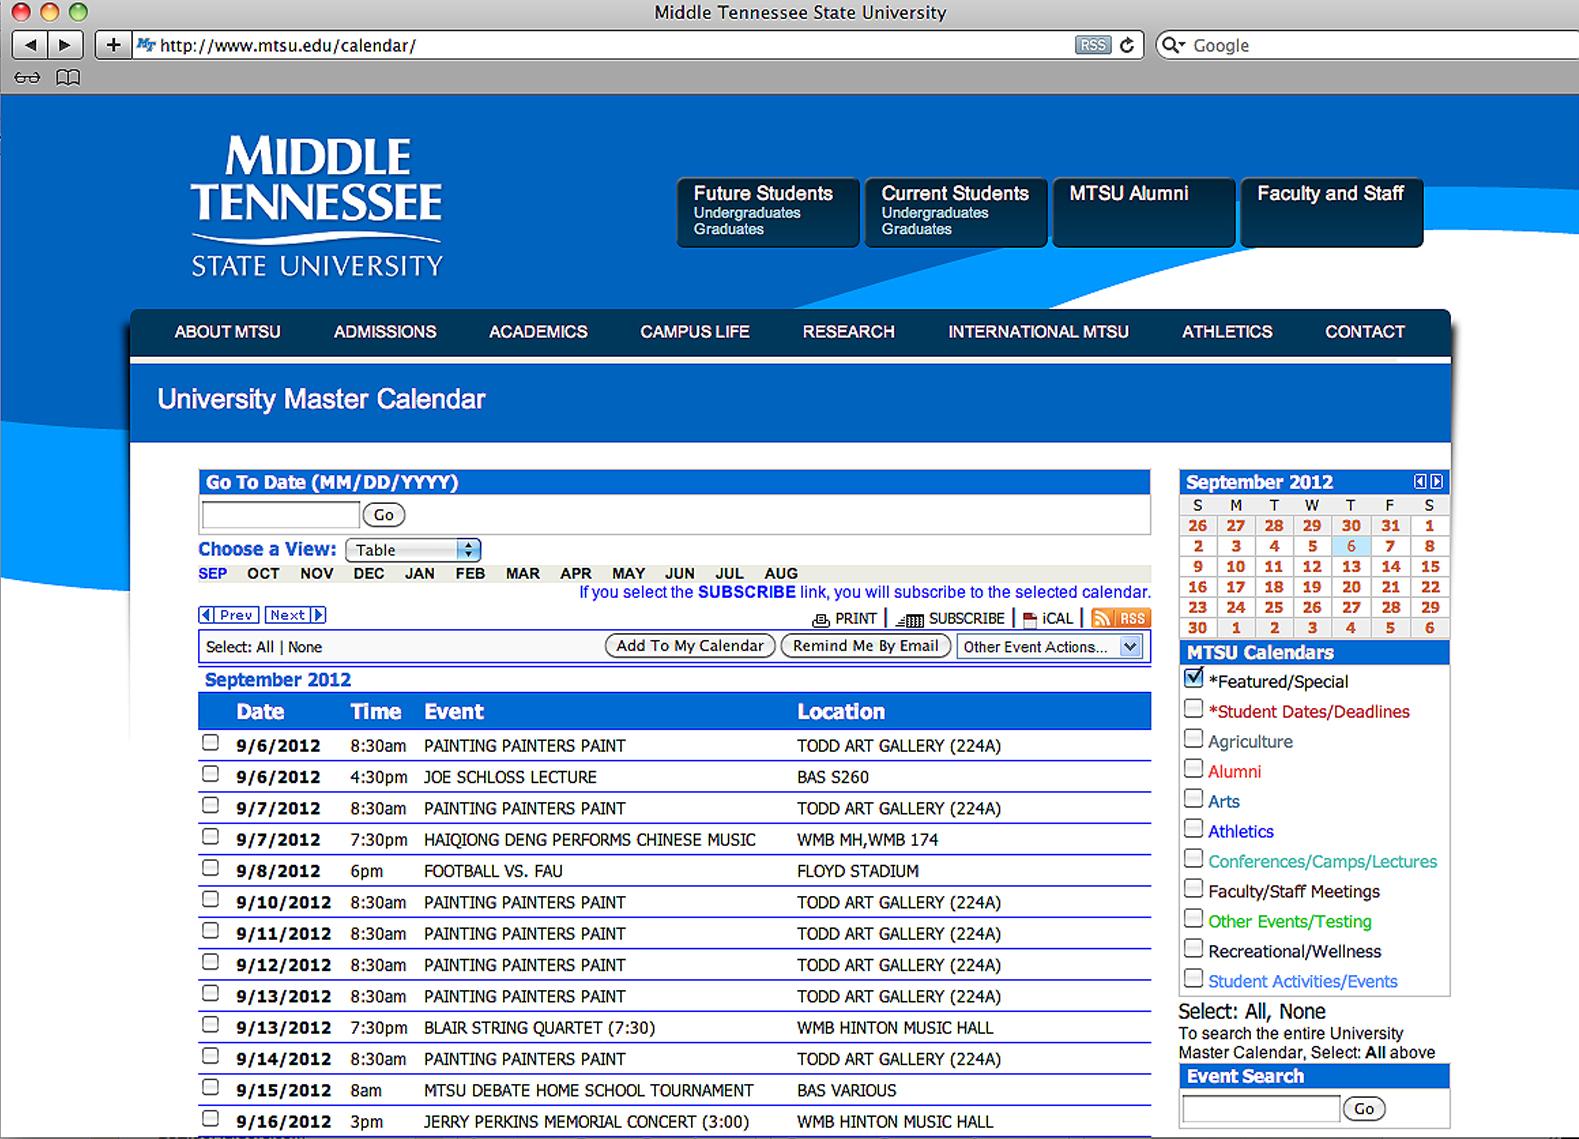 MTSU’s New Online Master Calendar Helps Users Find Events and Deadlines | WMOT